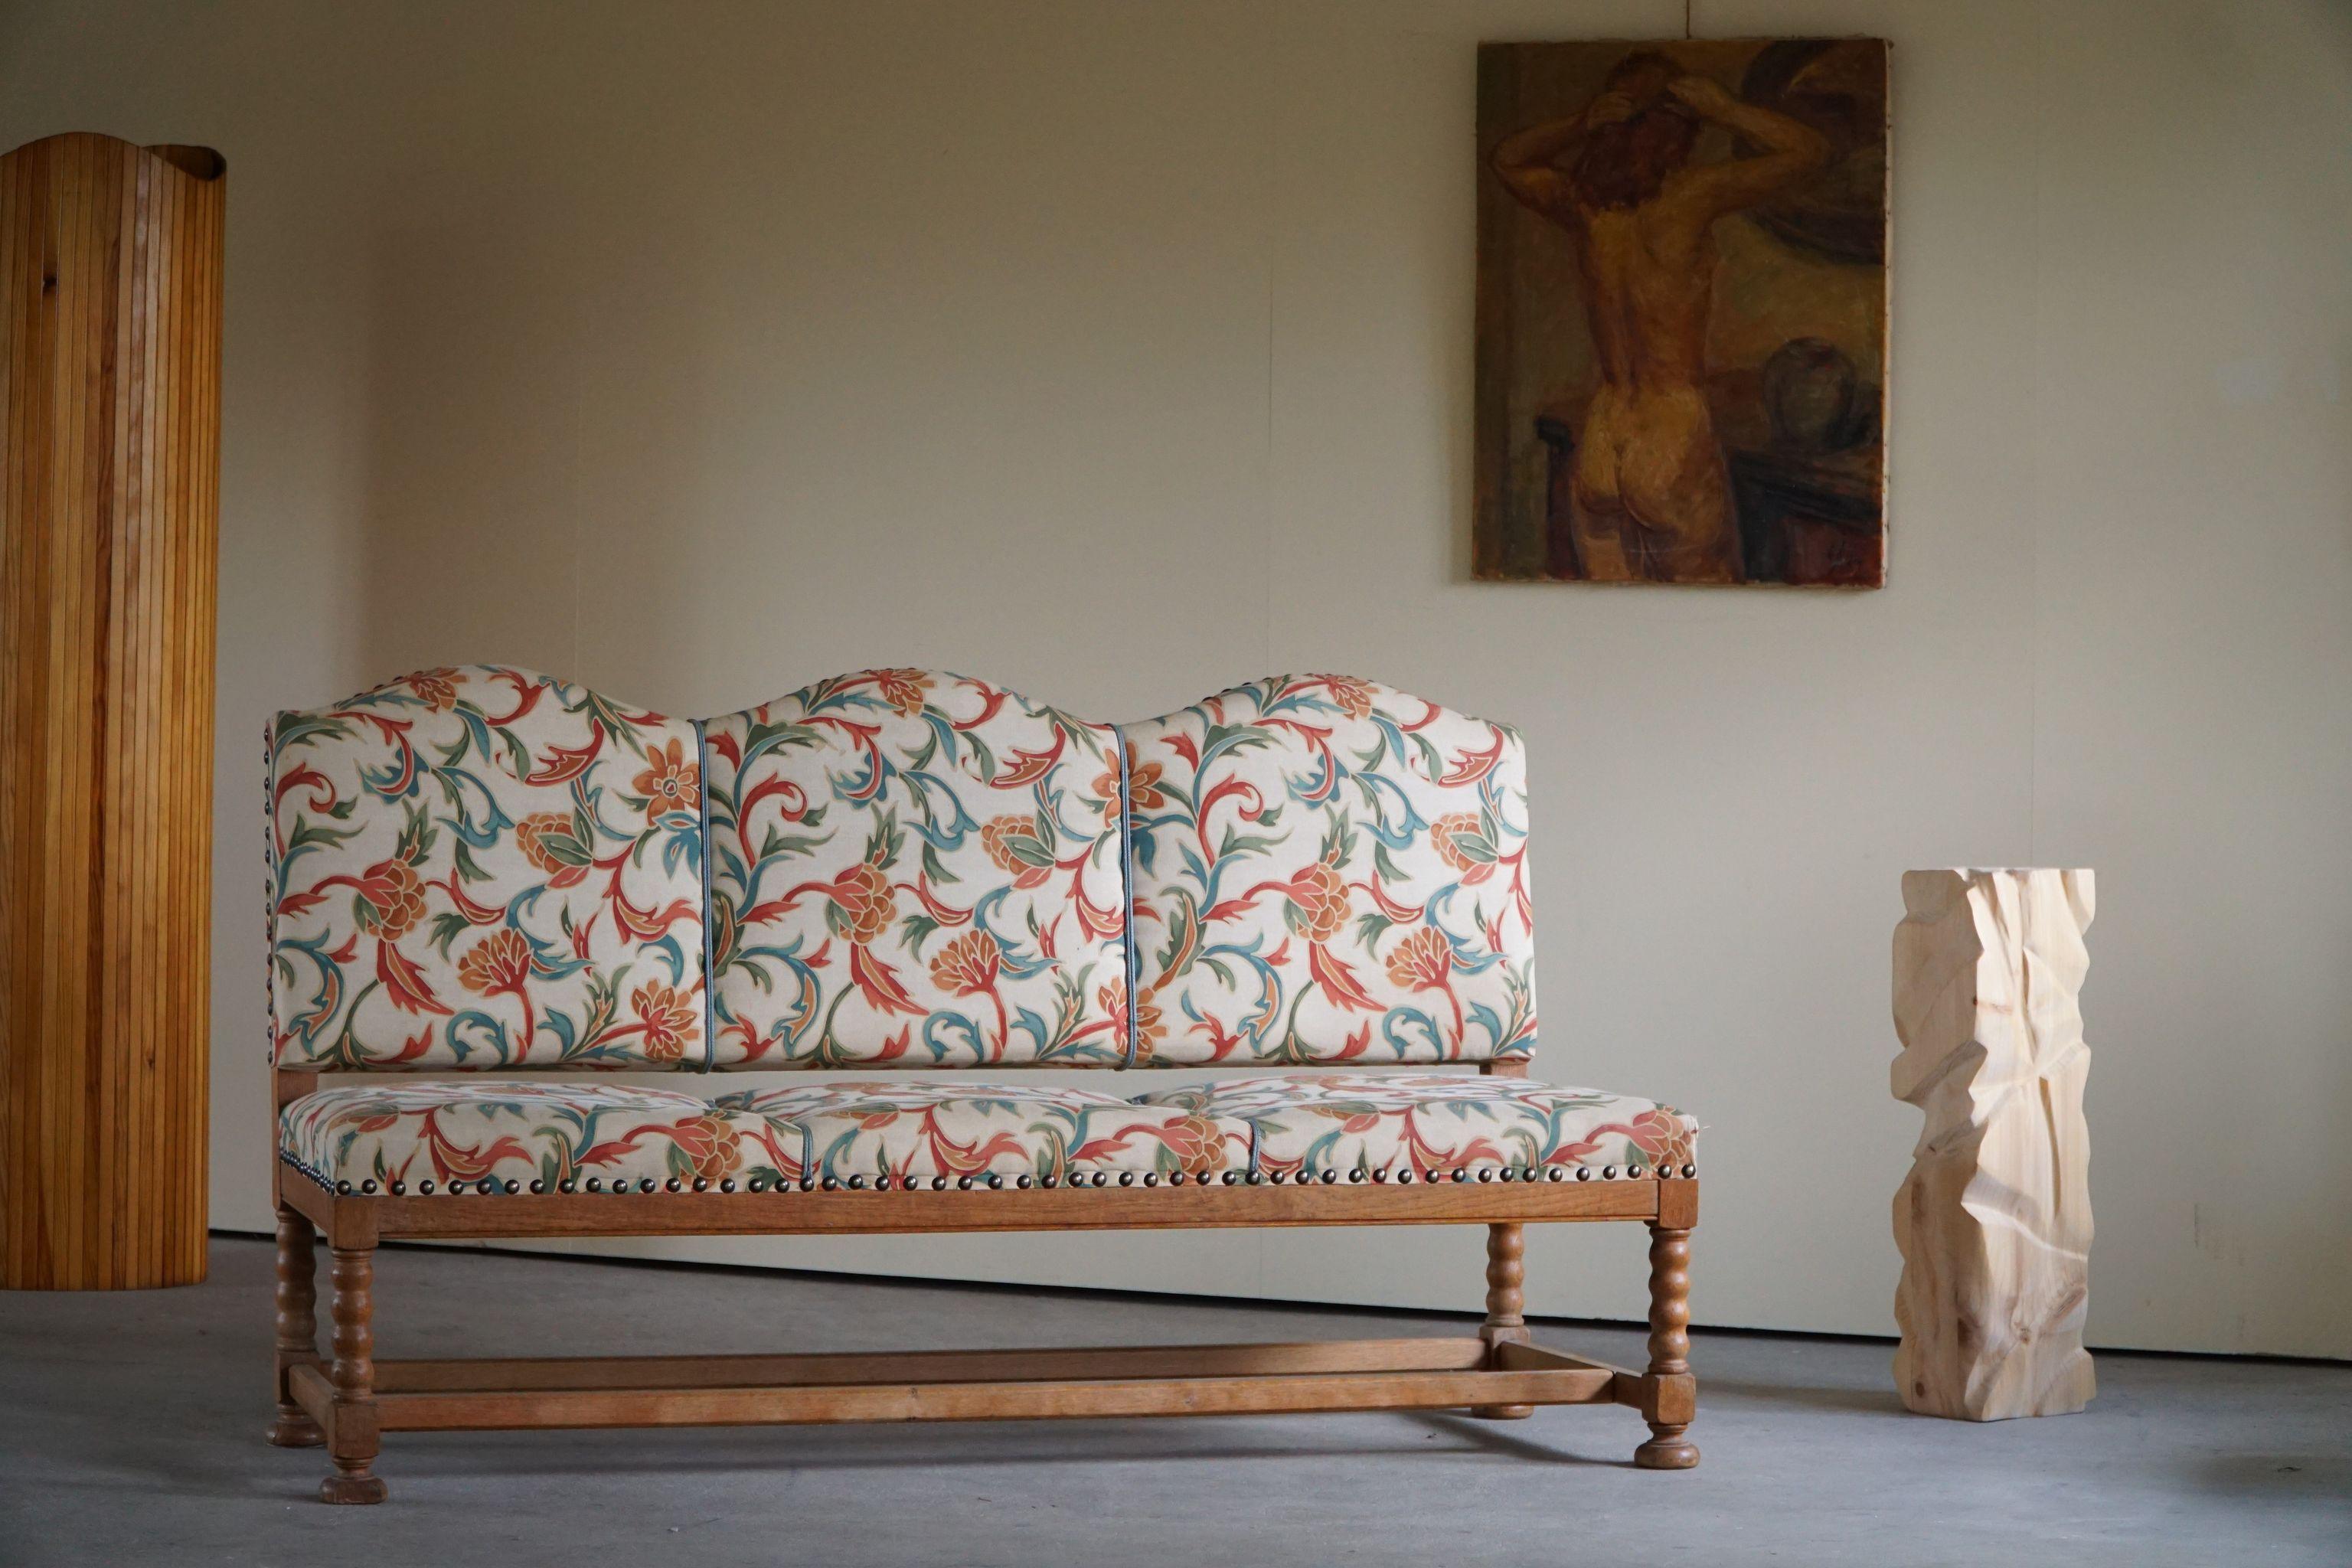 Fabric 19th Century Sculptural Three Seater Baroque Sofa, Made by a Danish Cabinetmaker